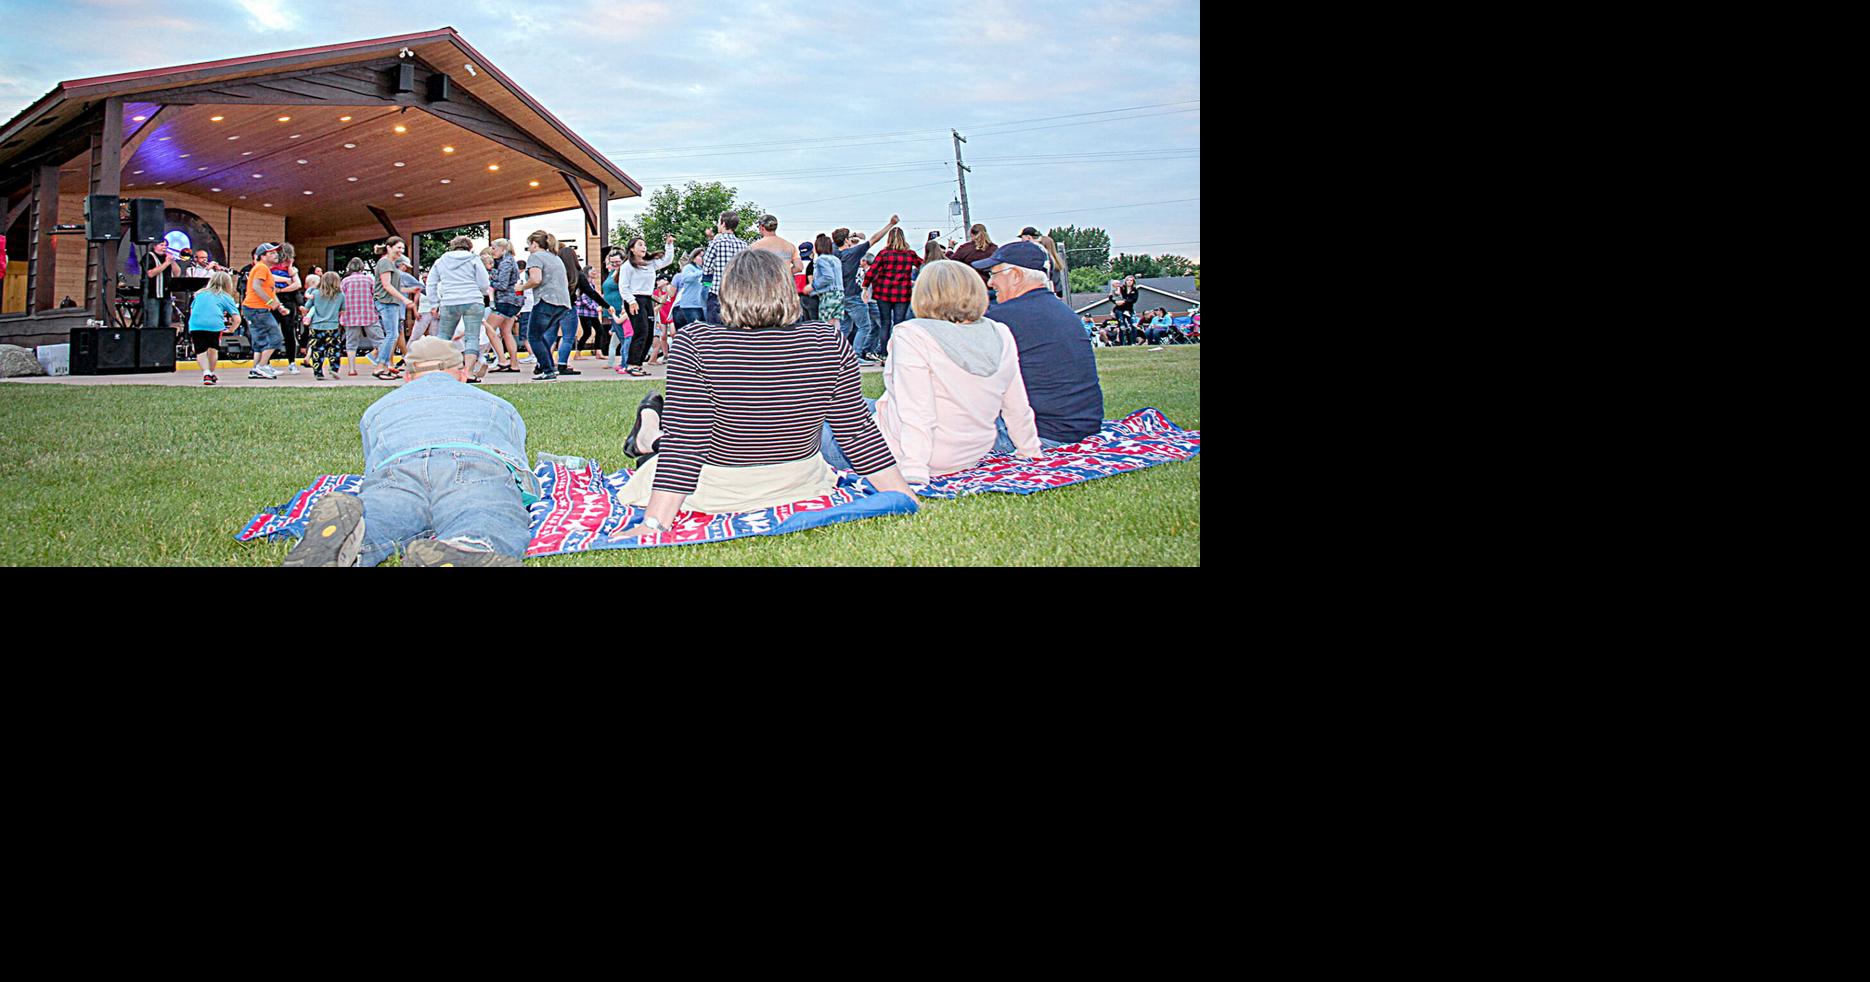 Amery’s beloved Music on the River concert series starts this Friday